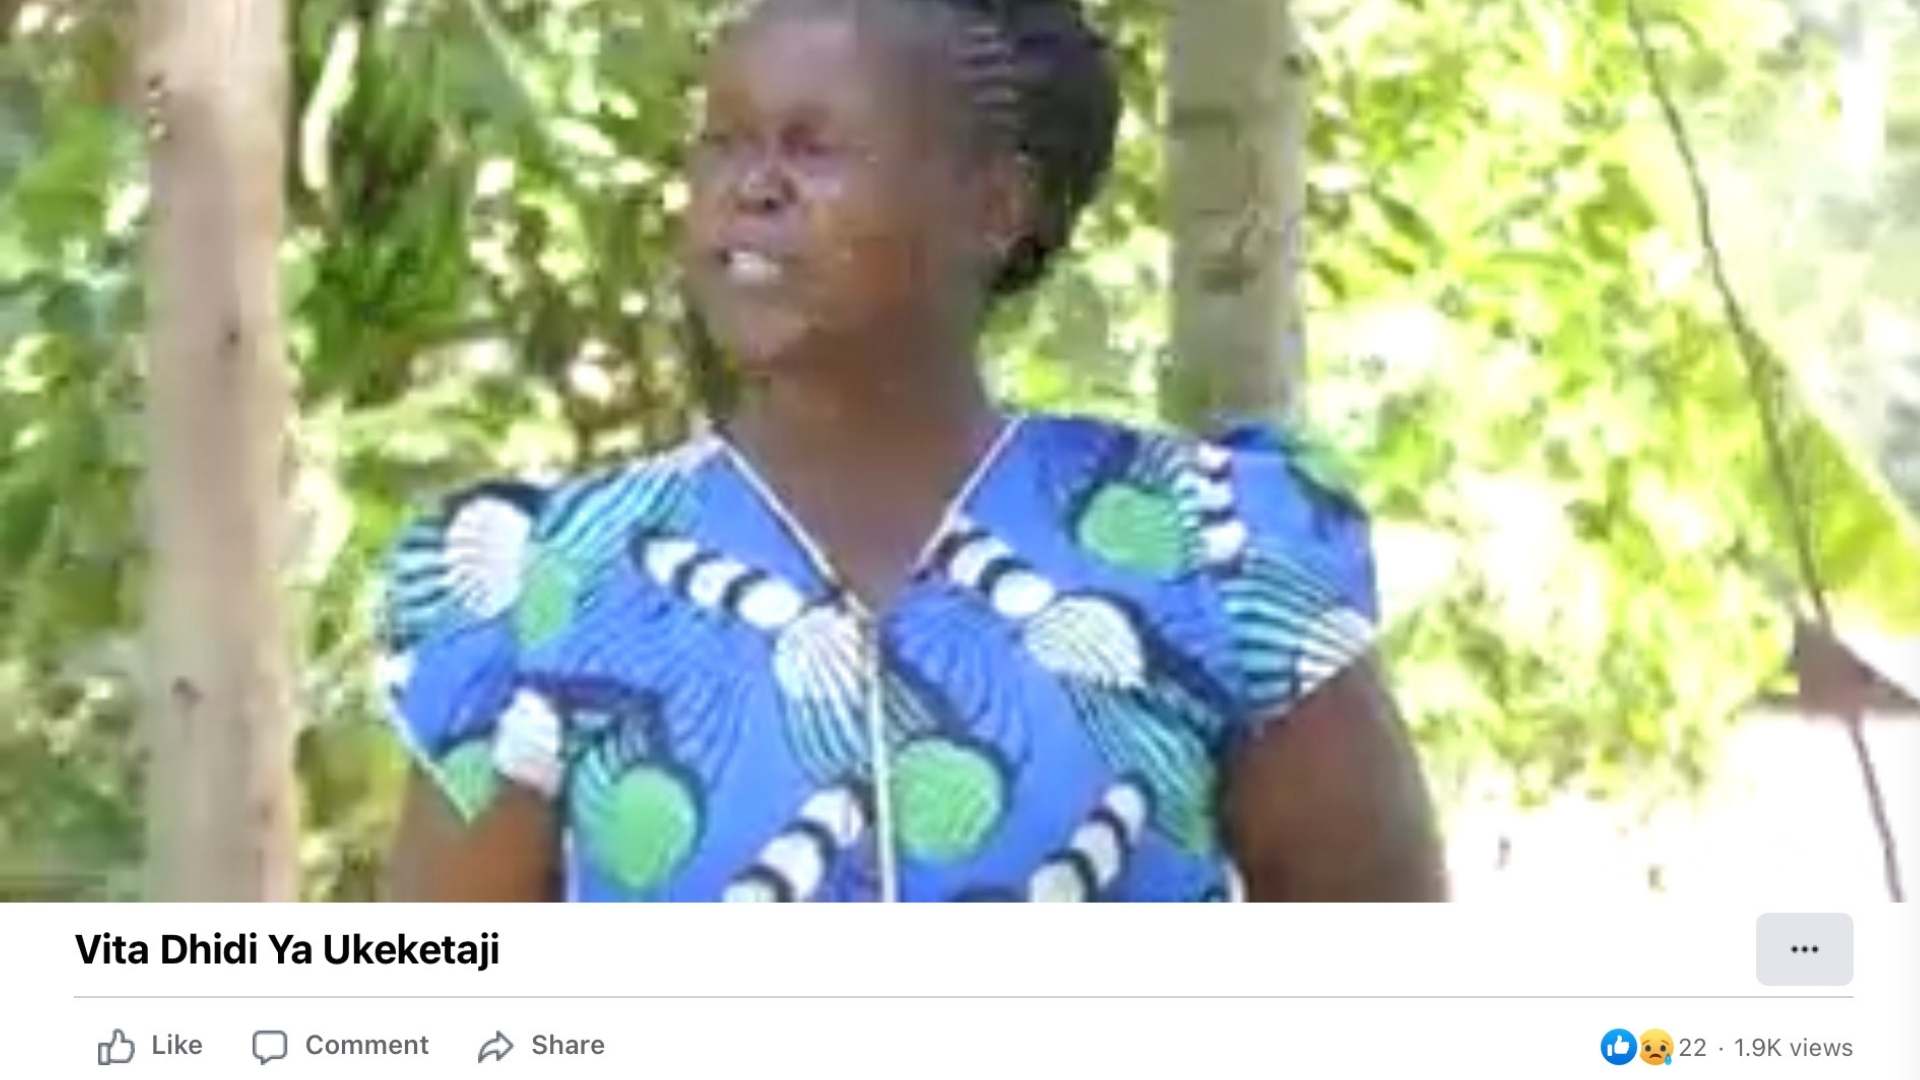 You are currently viewing Ex-Cutters speak out on Social Media channels against FGM, Kuria County, Kenya 